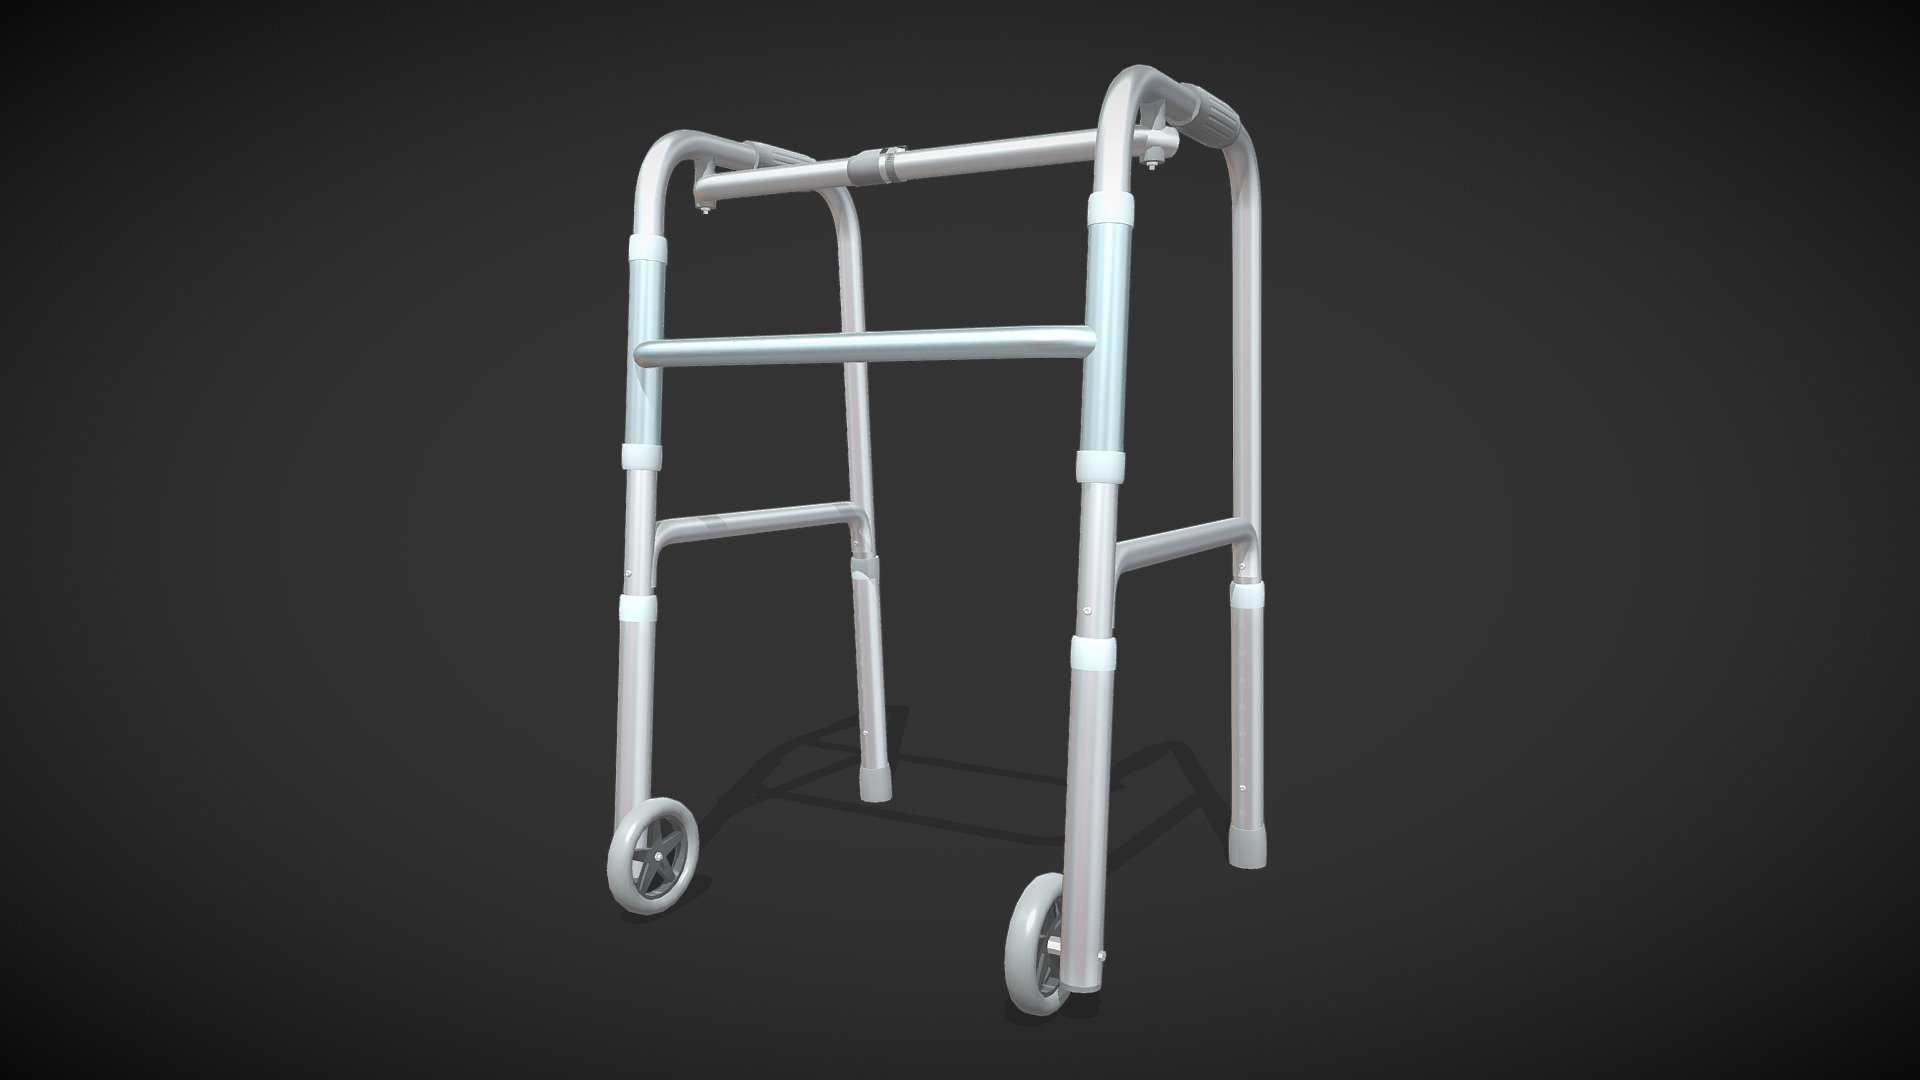 Old man walker aids 4 legs alluminium is walking equipment with tire for maximum comfort. This 3d model originally crated on Blender 2.79b.


It's have clean typology and unwrapped correctly.
It's have realistic style ready for your real time project.
8220 tris, 4438 verts.

It's contain texture with png format,
- Diffuse / albedo 2048 pixel.
- Ambient oclussion 4096 pixel.
- Diffuse with ambient oclussion mixed 4096 pixel.
- Normal map 4096 pixel.
- Roughness 2048 pixel.
- Specular 2048 pixel.
- Metalness 2048 pixel.

I also have another walking aids 3d model on my collection 3d model